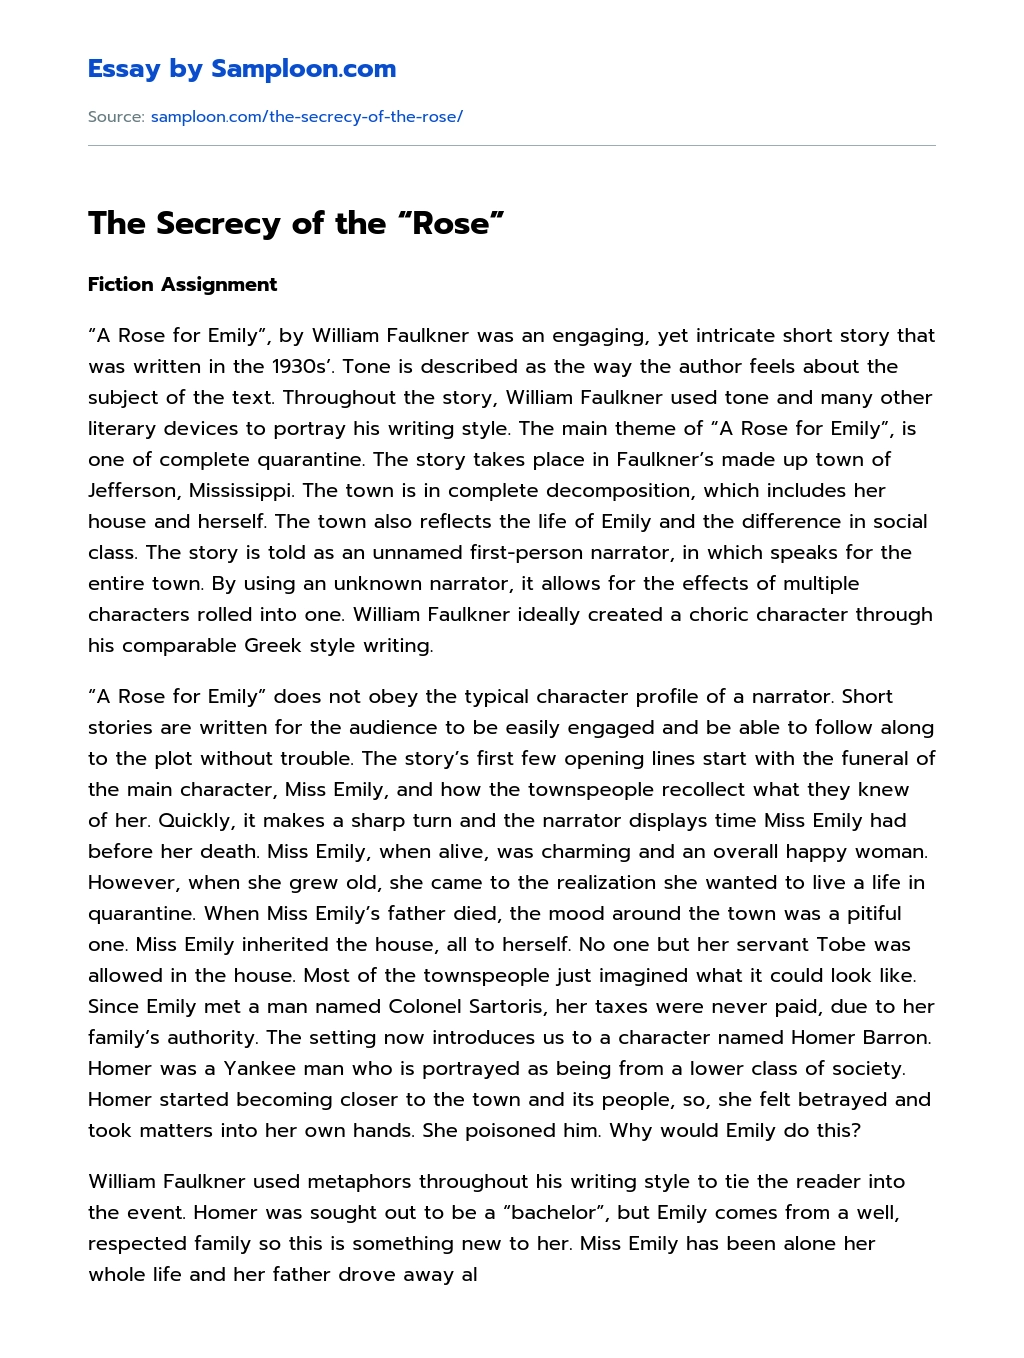 The Secrecy of the “Rose” essay